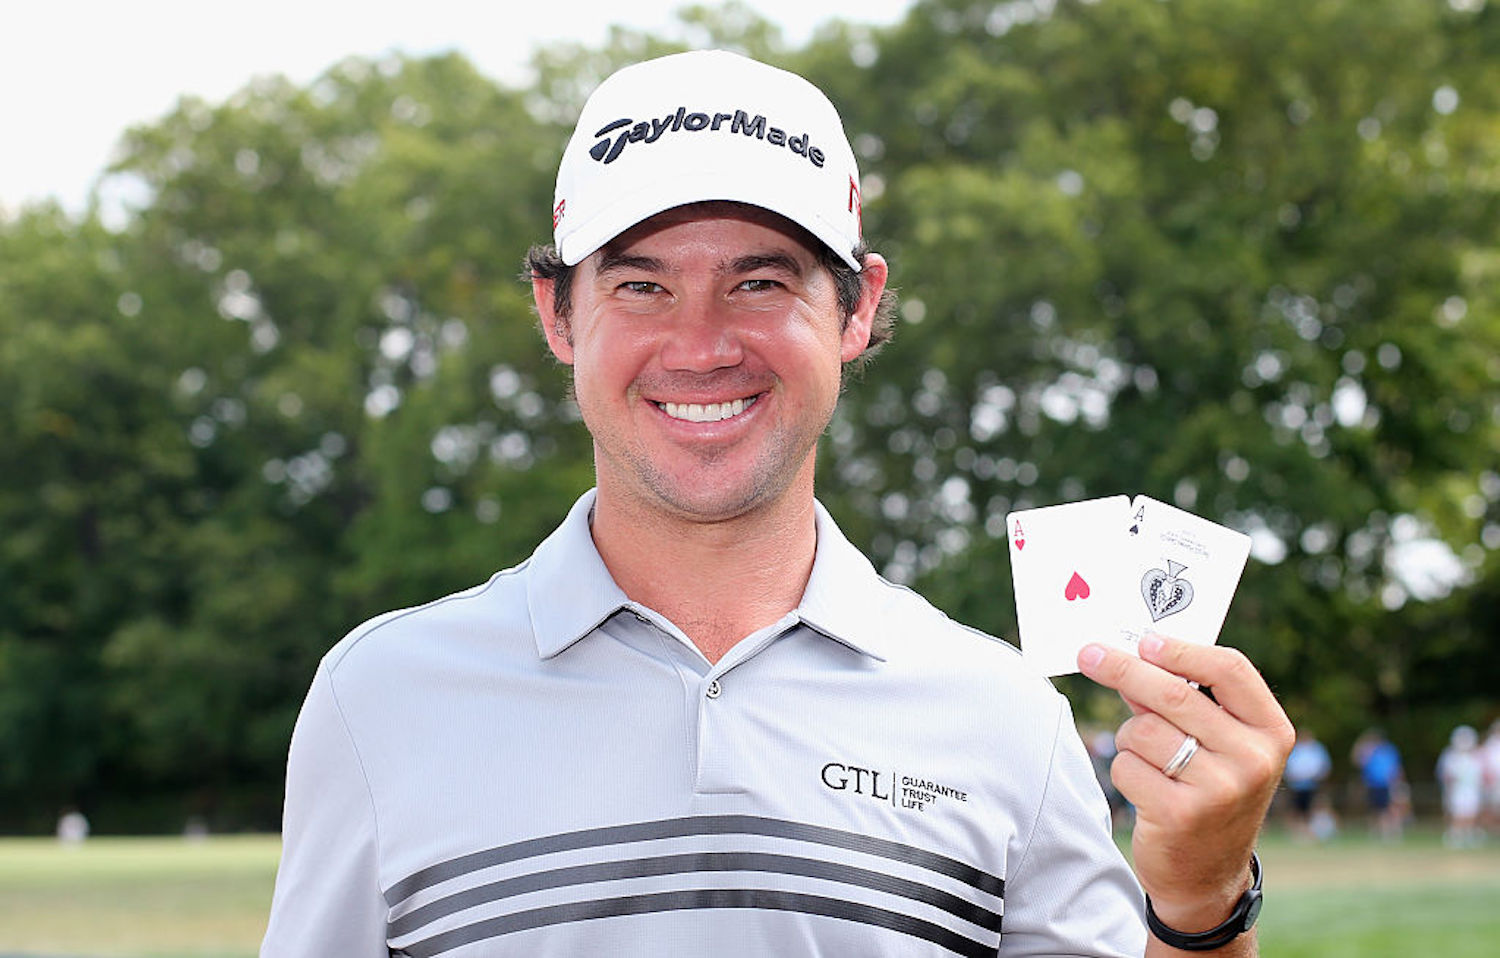 Making a hole-in-one on the PGA Tour is hard enough, but has anyone ever made two aces in the same round before?